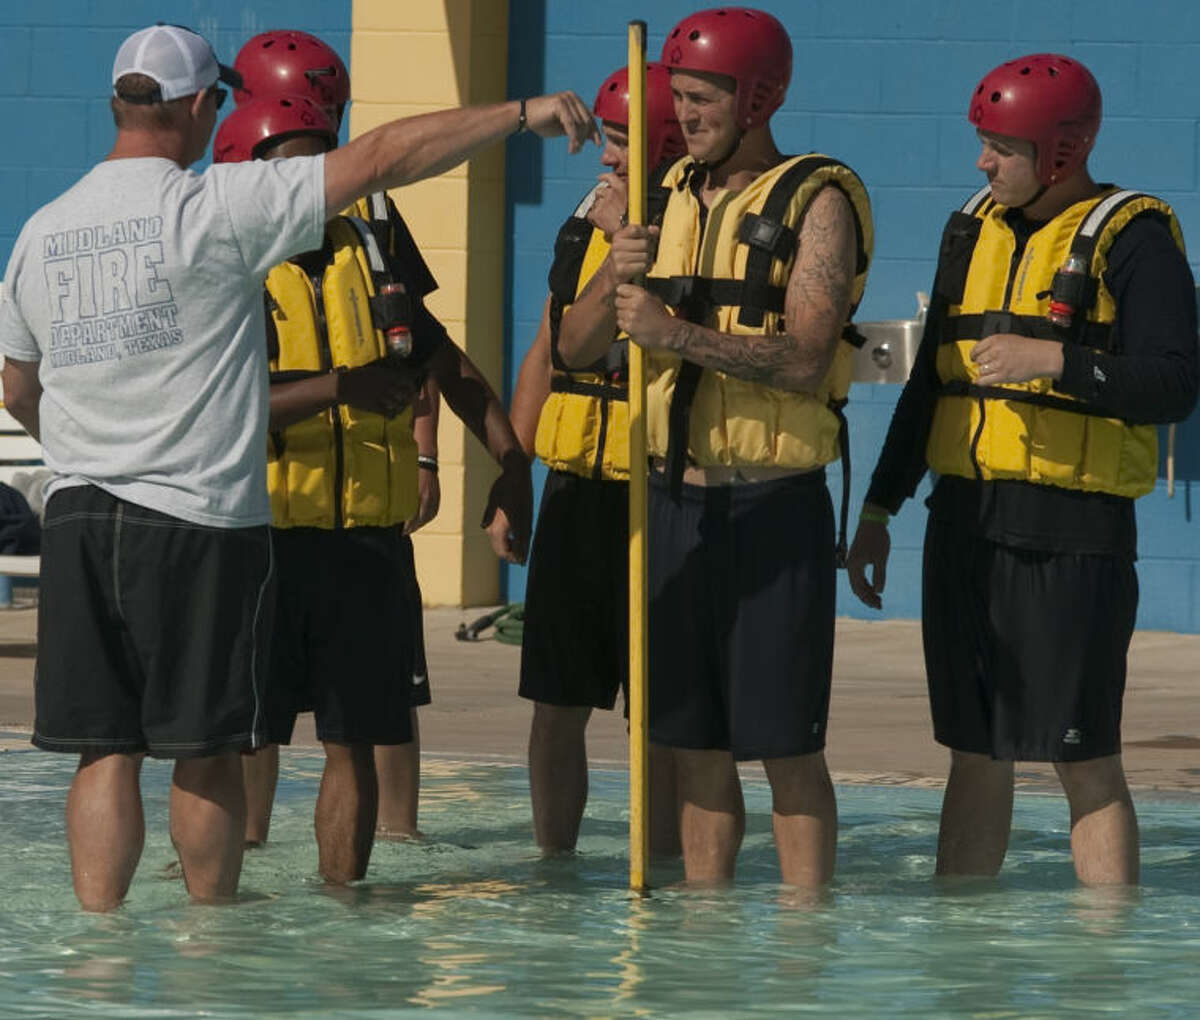 MFD firefighter Rusty Welch works with recruits on safety measures during water rescues Thursday at Washington Pool. Tim Fischer\Reporter-Telegram